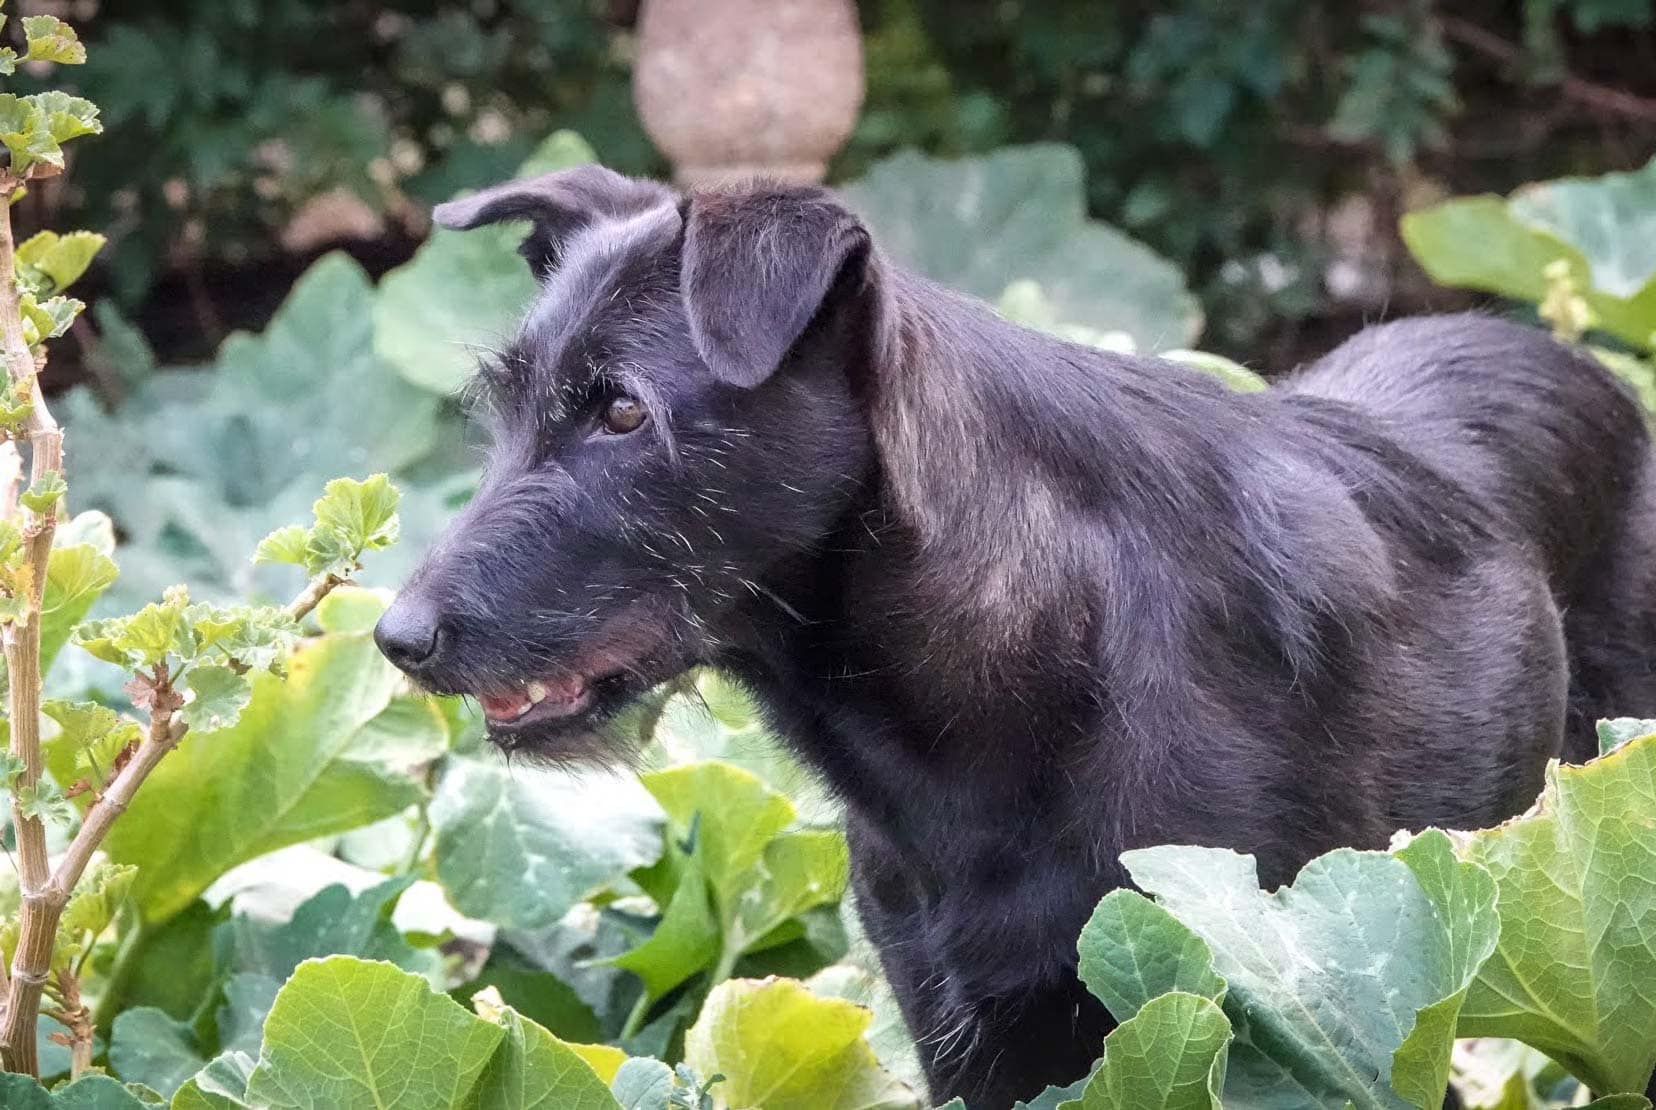 Maggie - a black dog that looks like a small version of a wolf hound